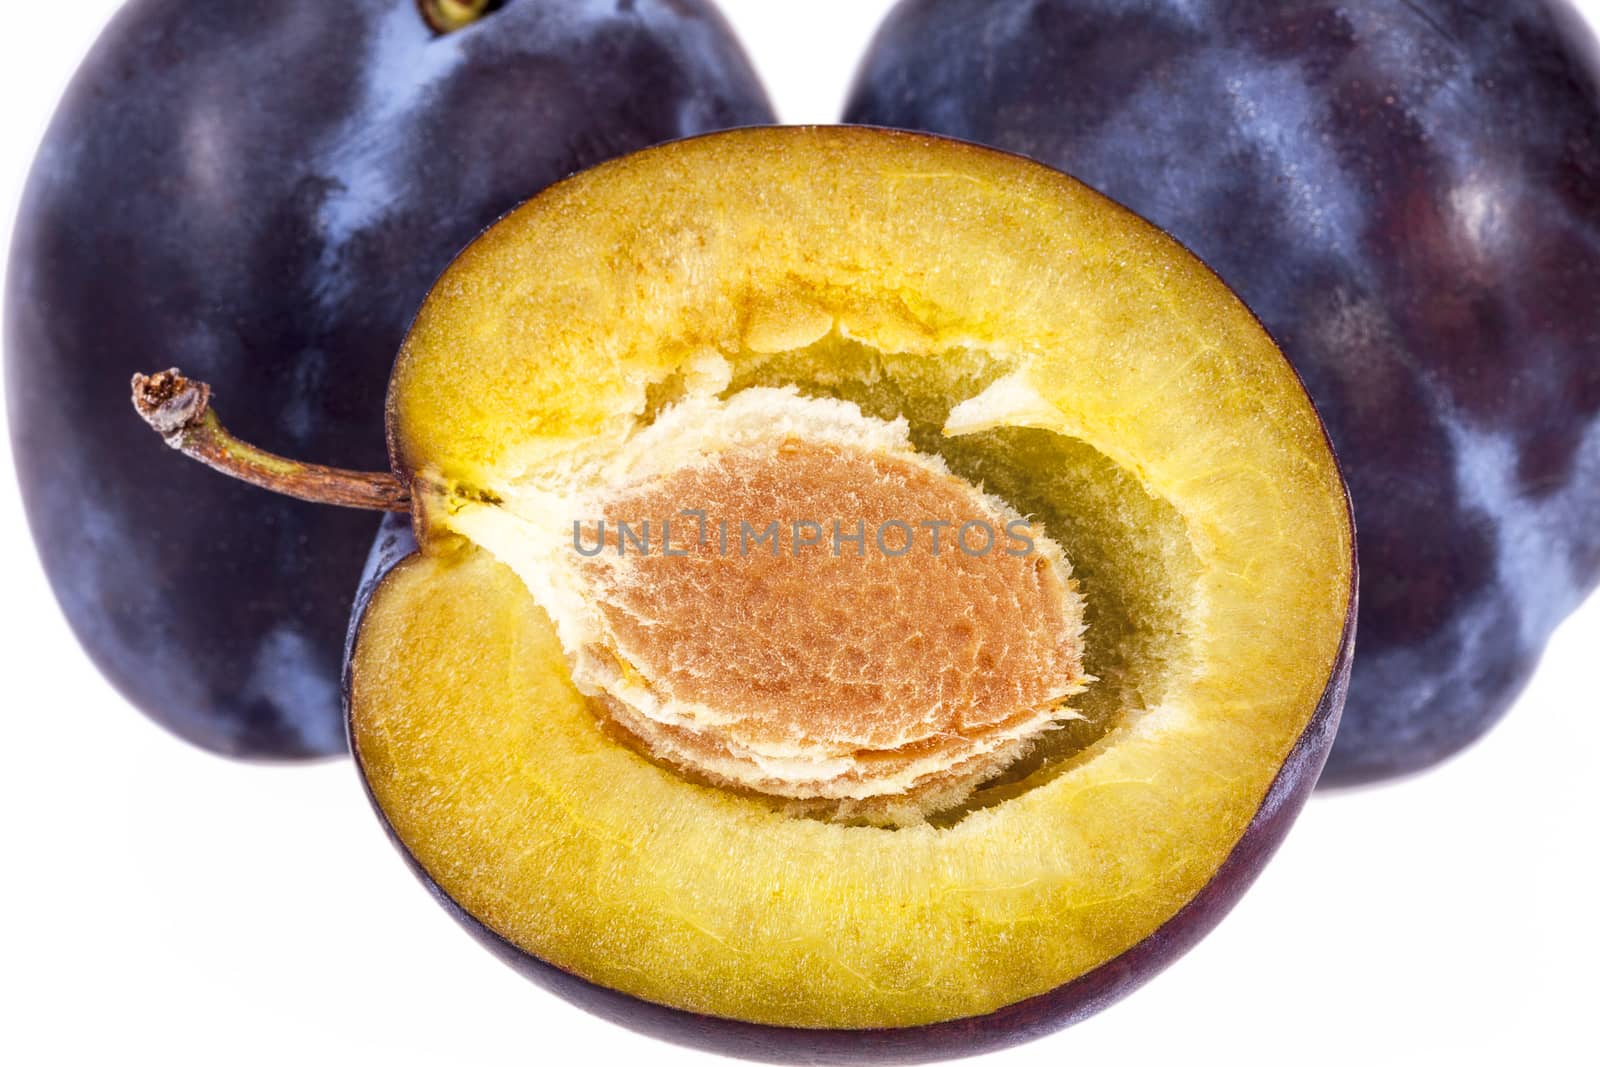 Some fruits of plum  on white background, close up